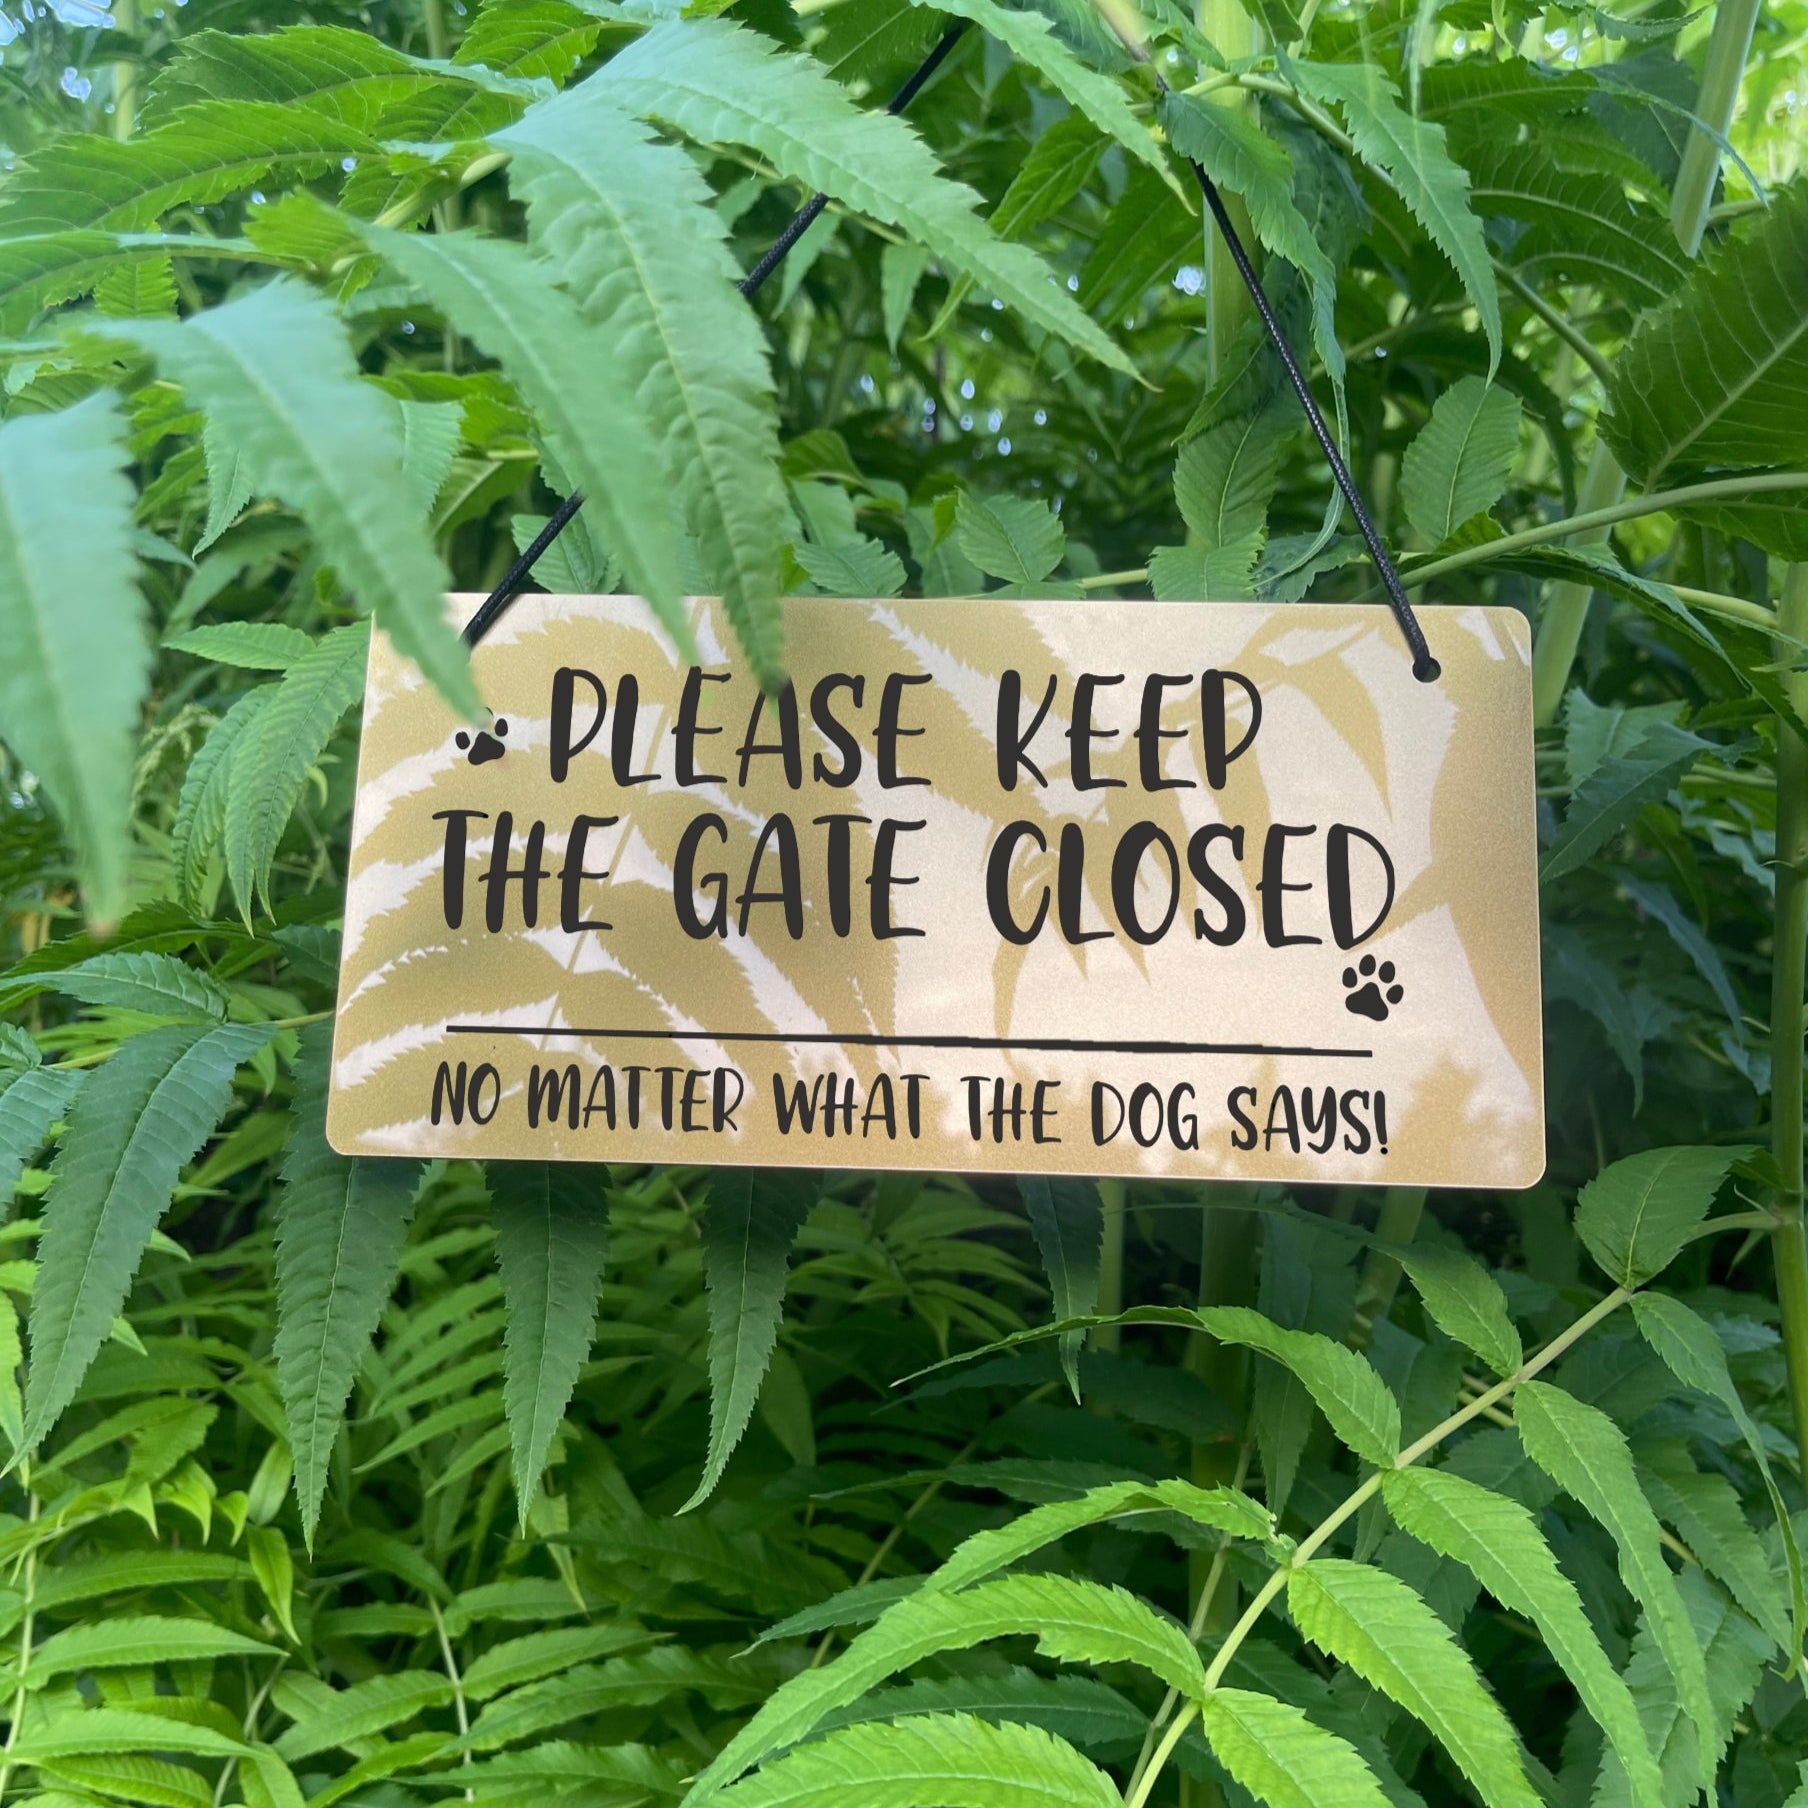  "Durable 3mm Thick Acrylic 'Please Keep the Gate Closed' Sign" Description: A sturdy sign made from 3mm thick acrylic material, laser-engraved with the message "Please Keep the Gate Closed, No Matter What the Dog Says." The sign is built to withstand wear and tear.